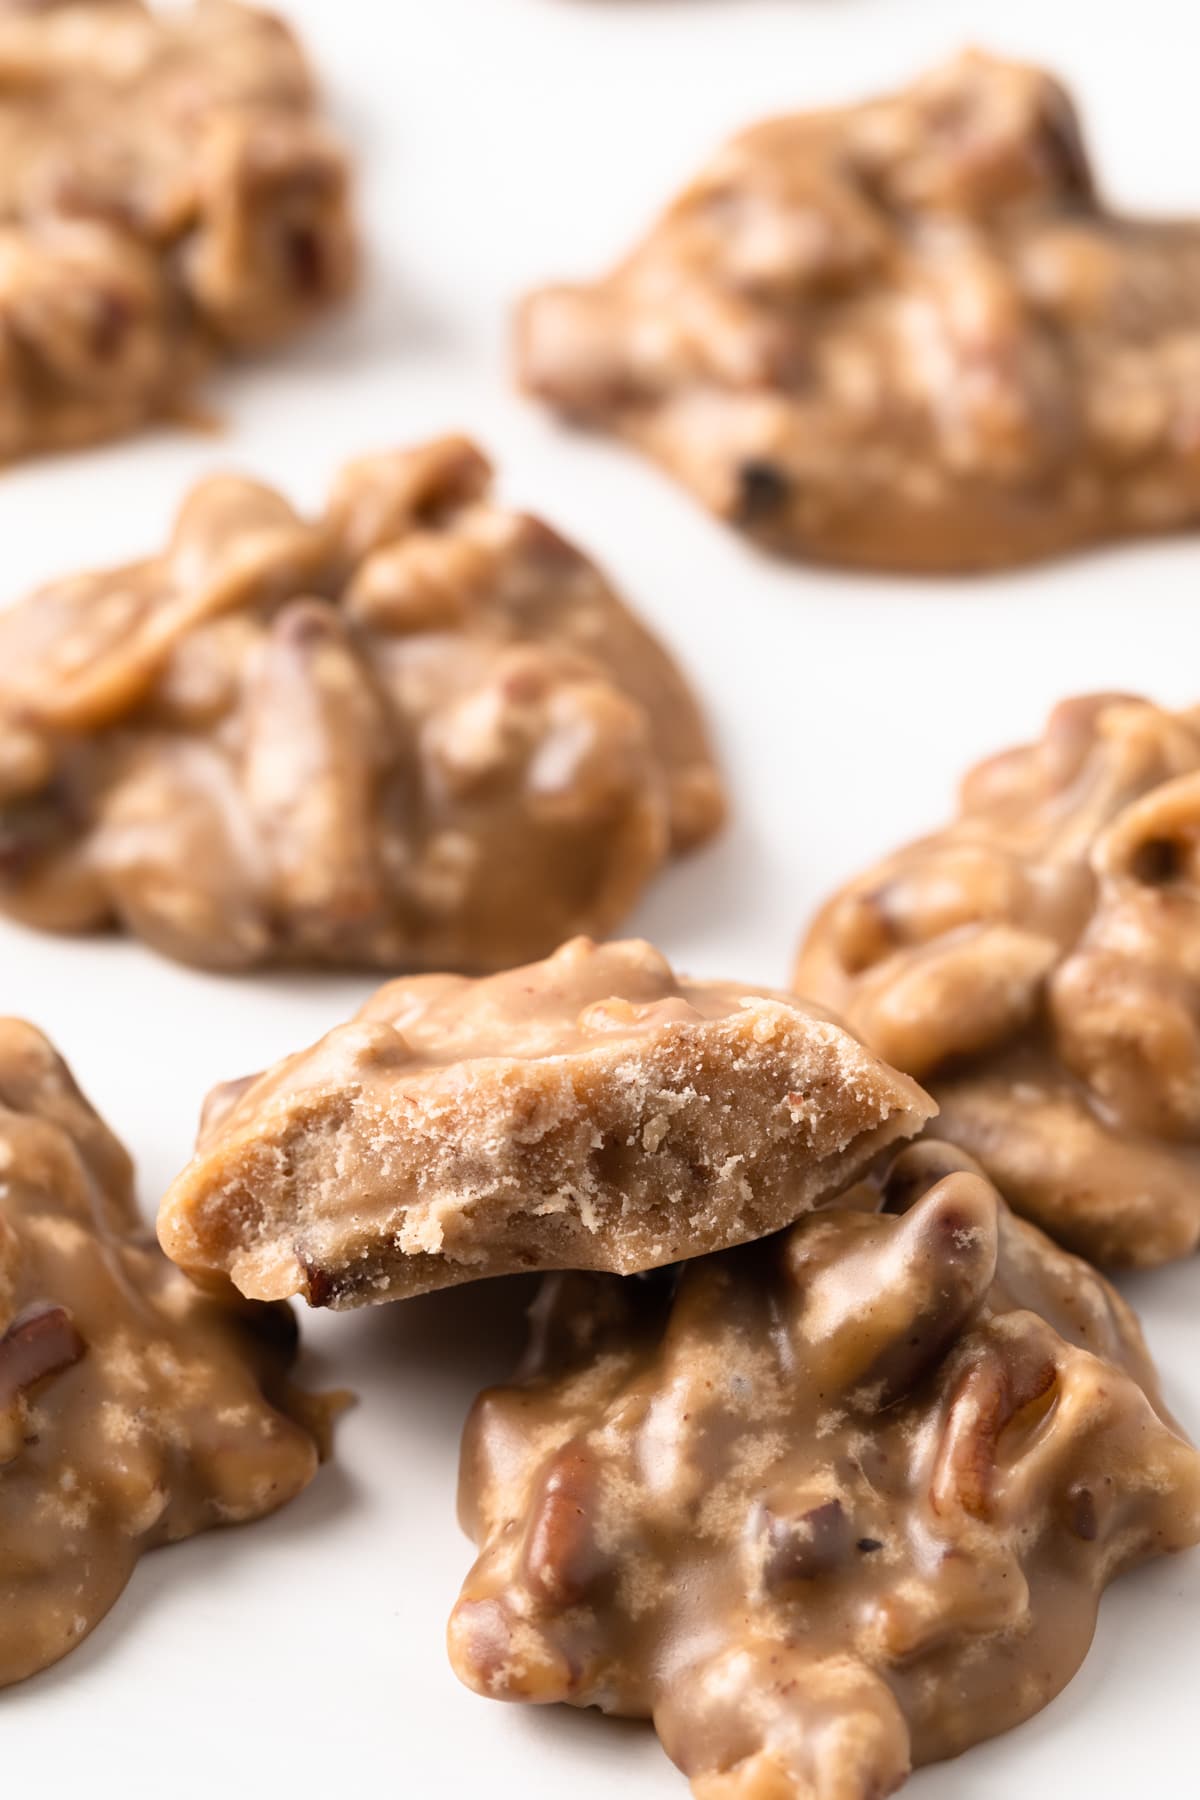 praline pecans arranged on white background with one broken in half so center is visible